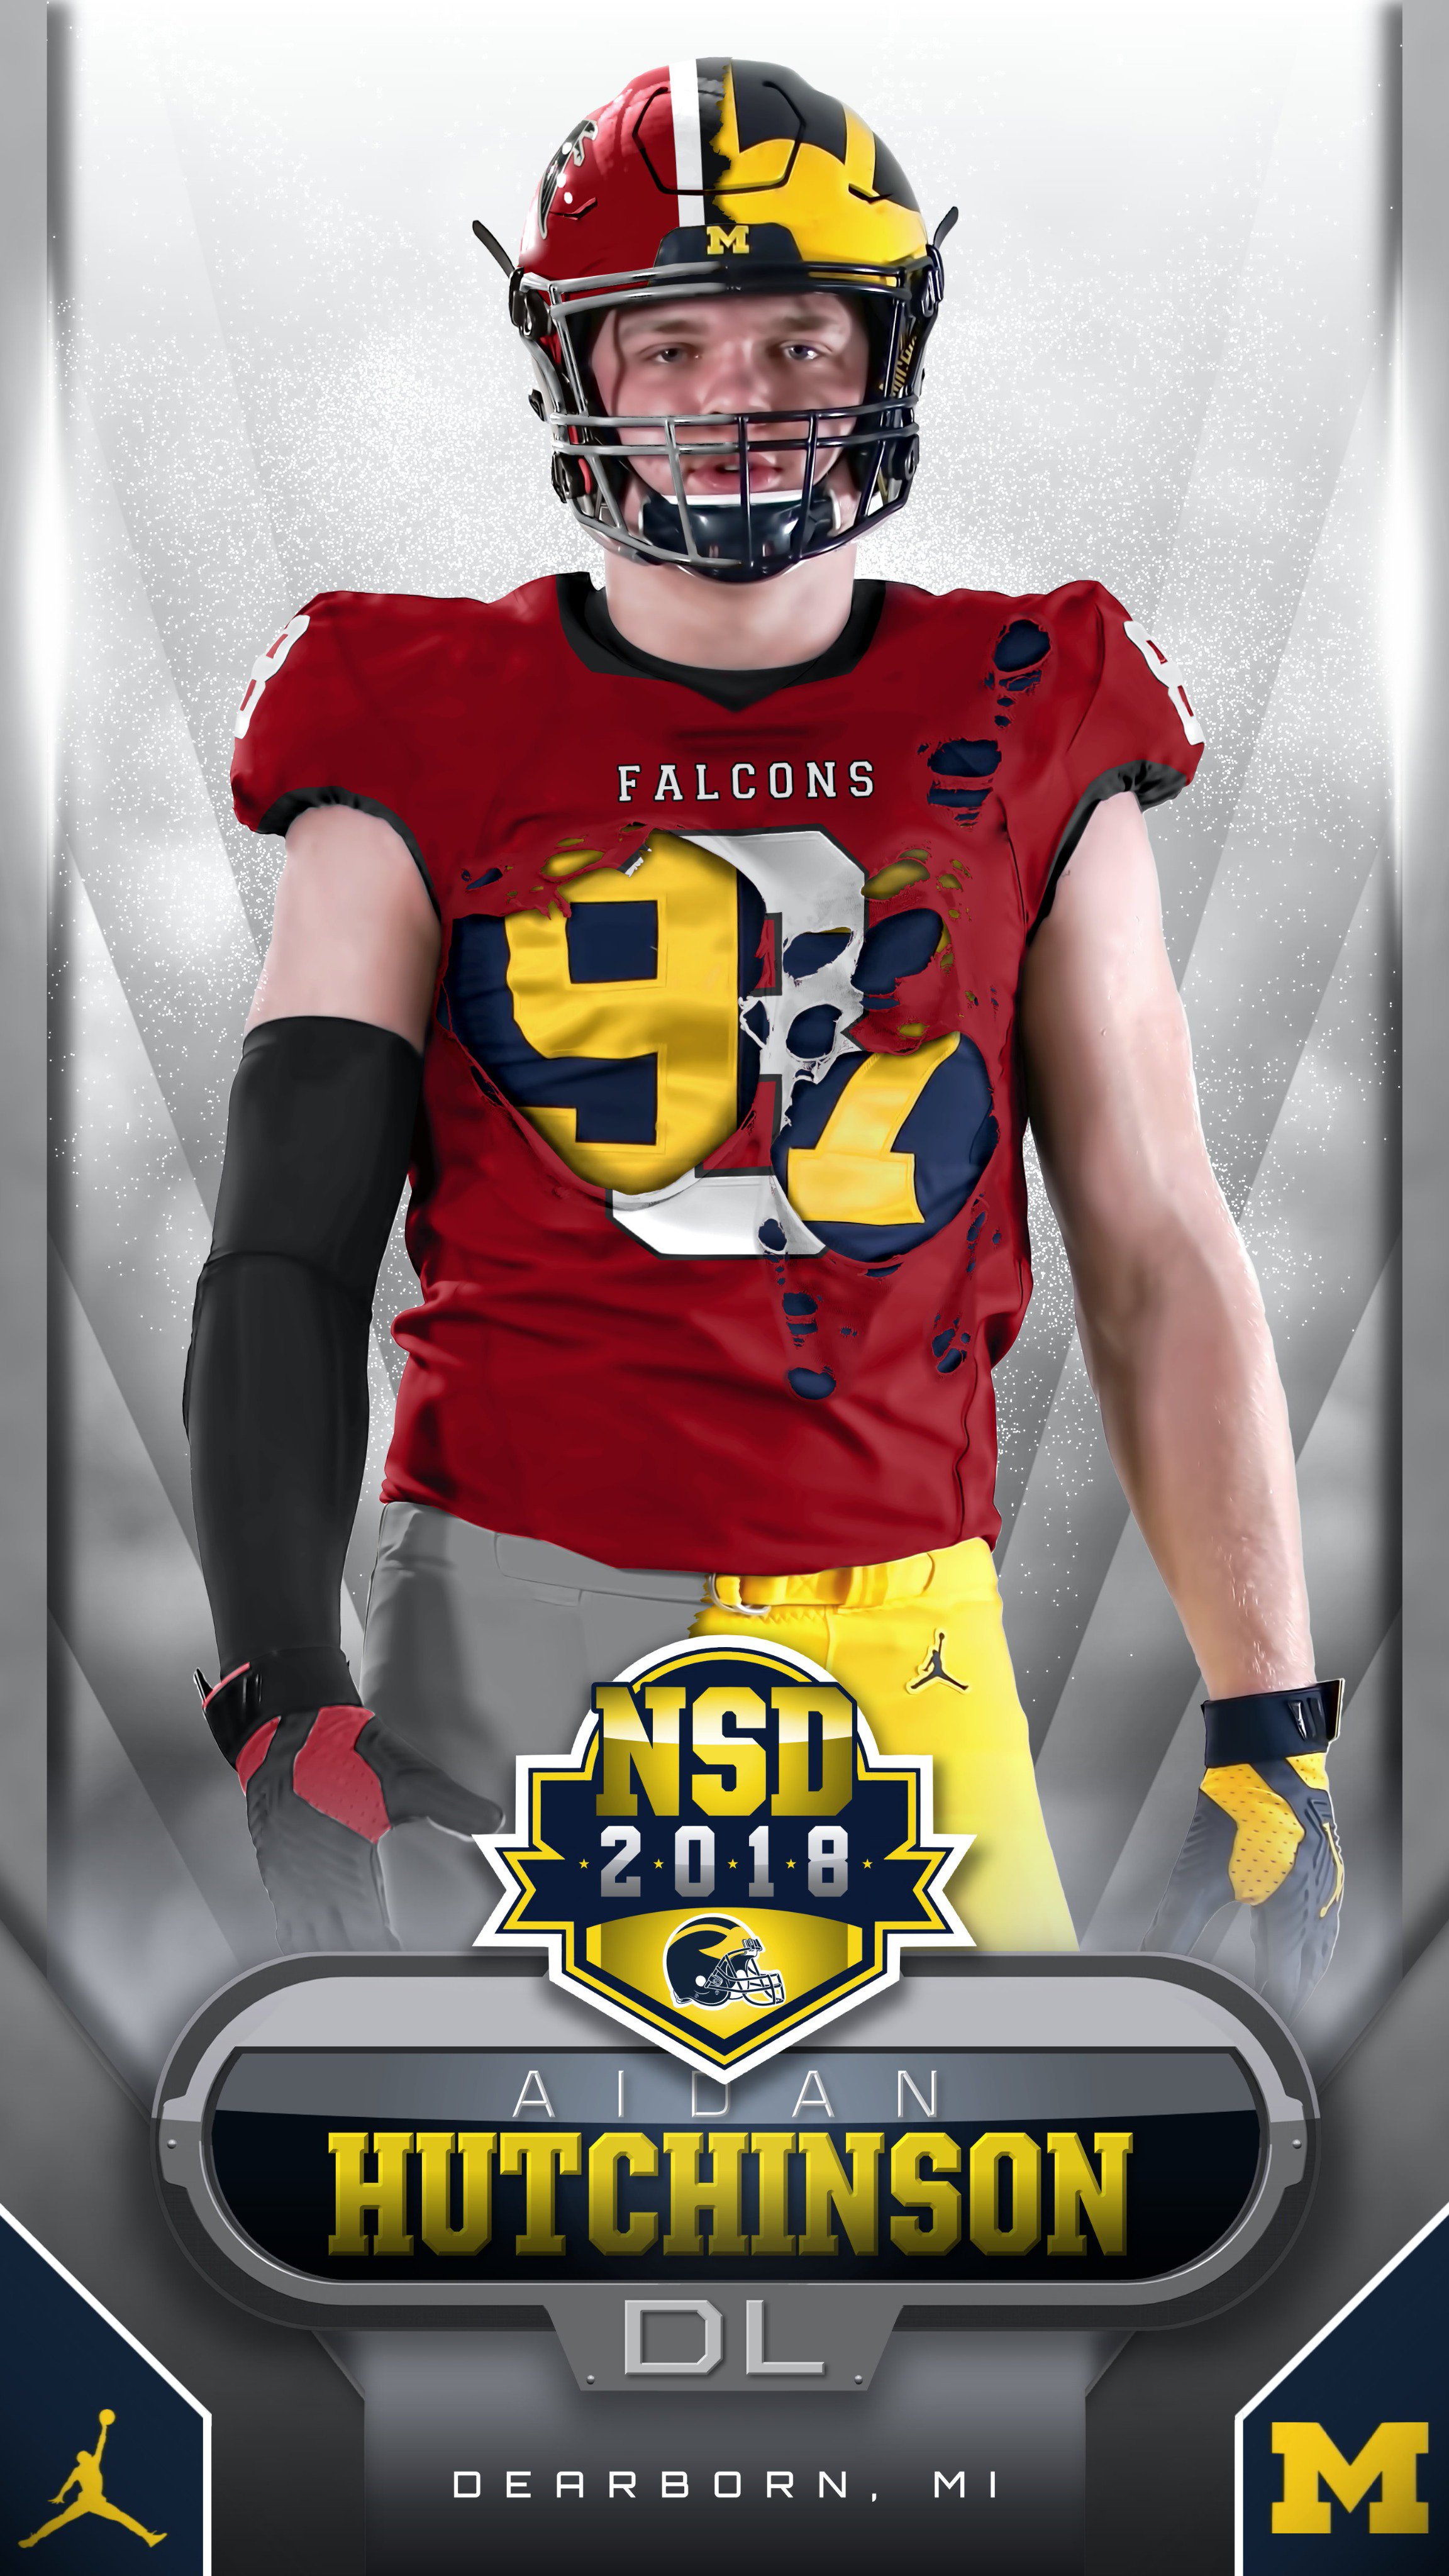 Michigan Football signed with Michigan let's welcome Aidan Hutchinson (again) to Michigan!! #GoBlue #BlueBloods18